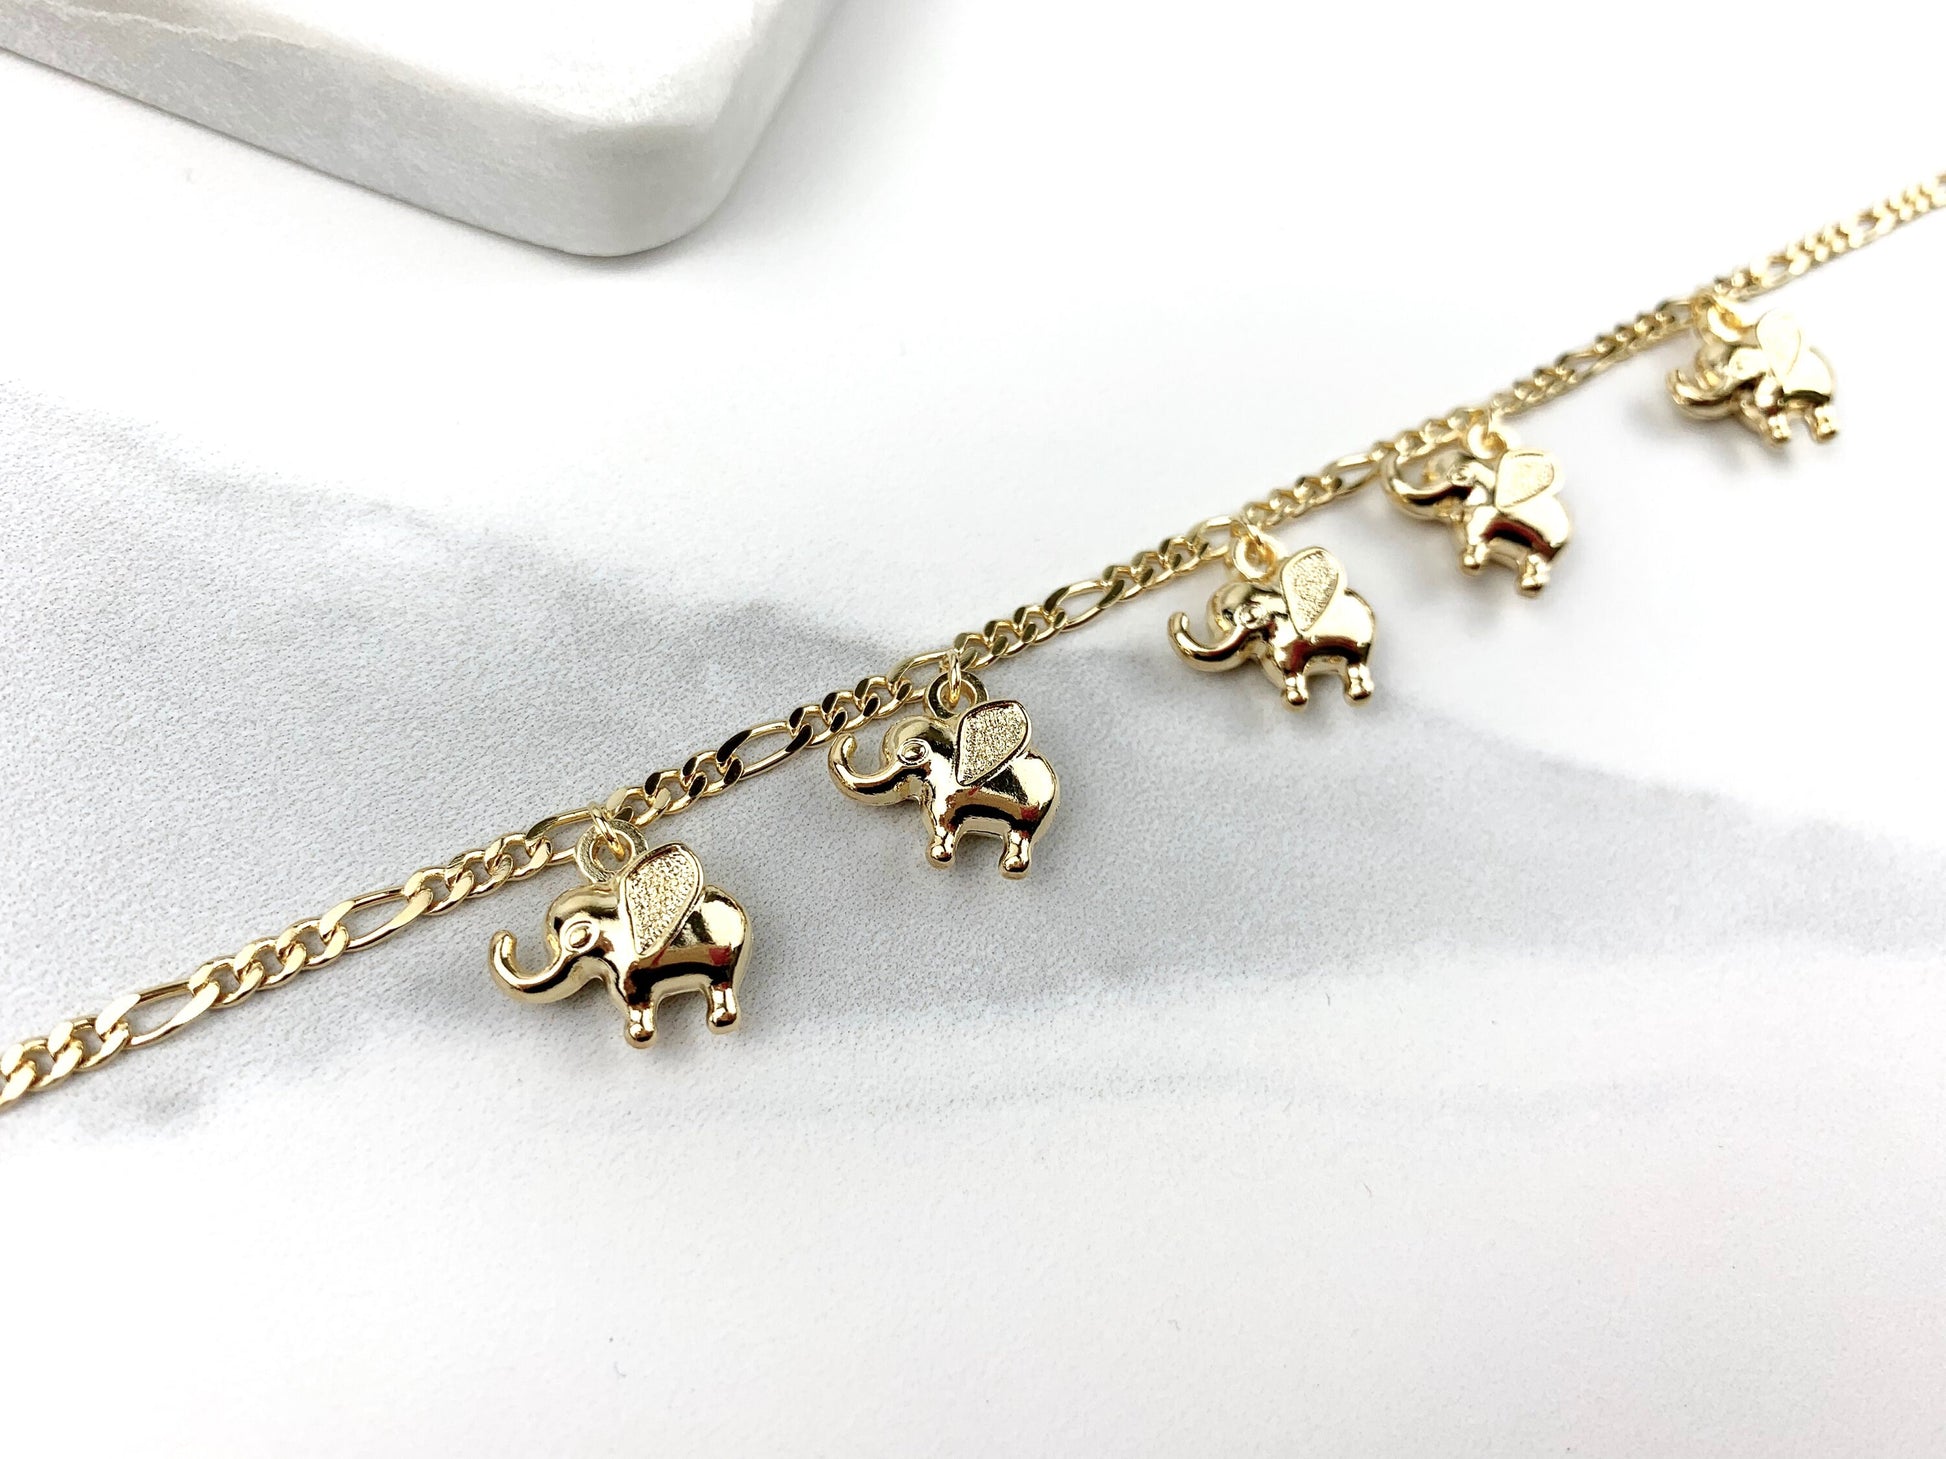 18k Gold Filled 3mm Figaro Chain Four Big Elephants Charms Anklet Wholesale Jewelry Supplies